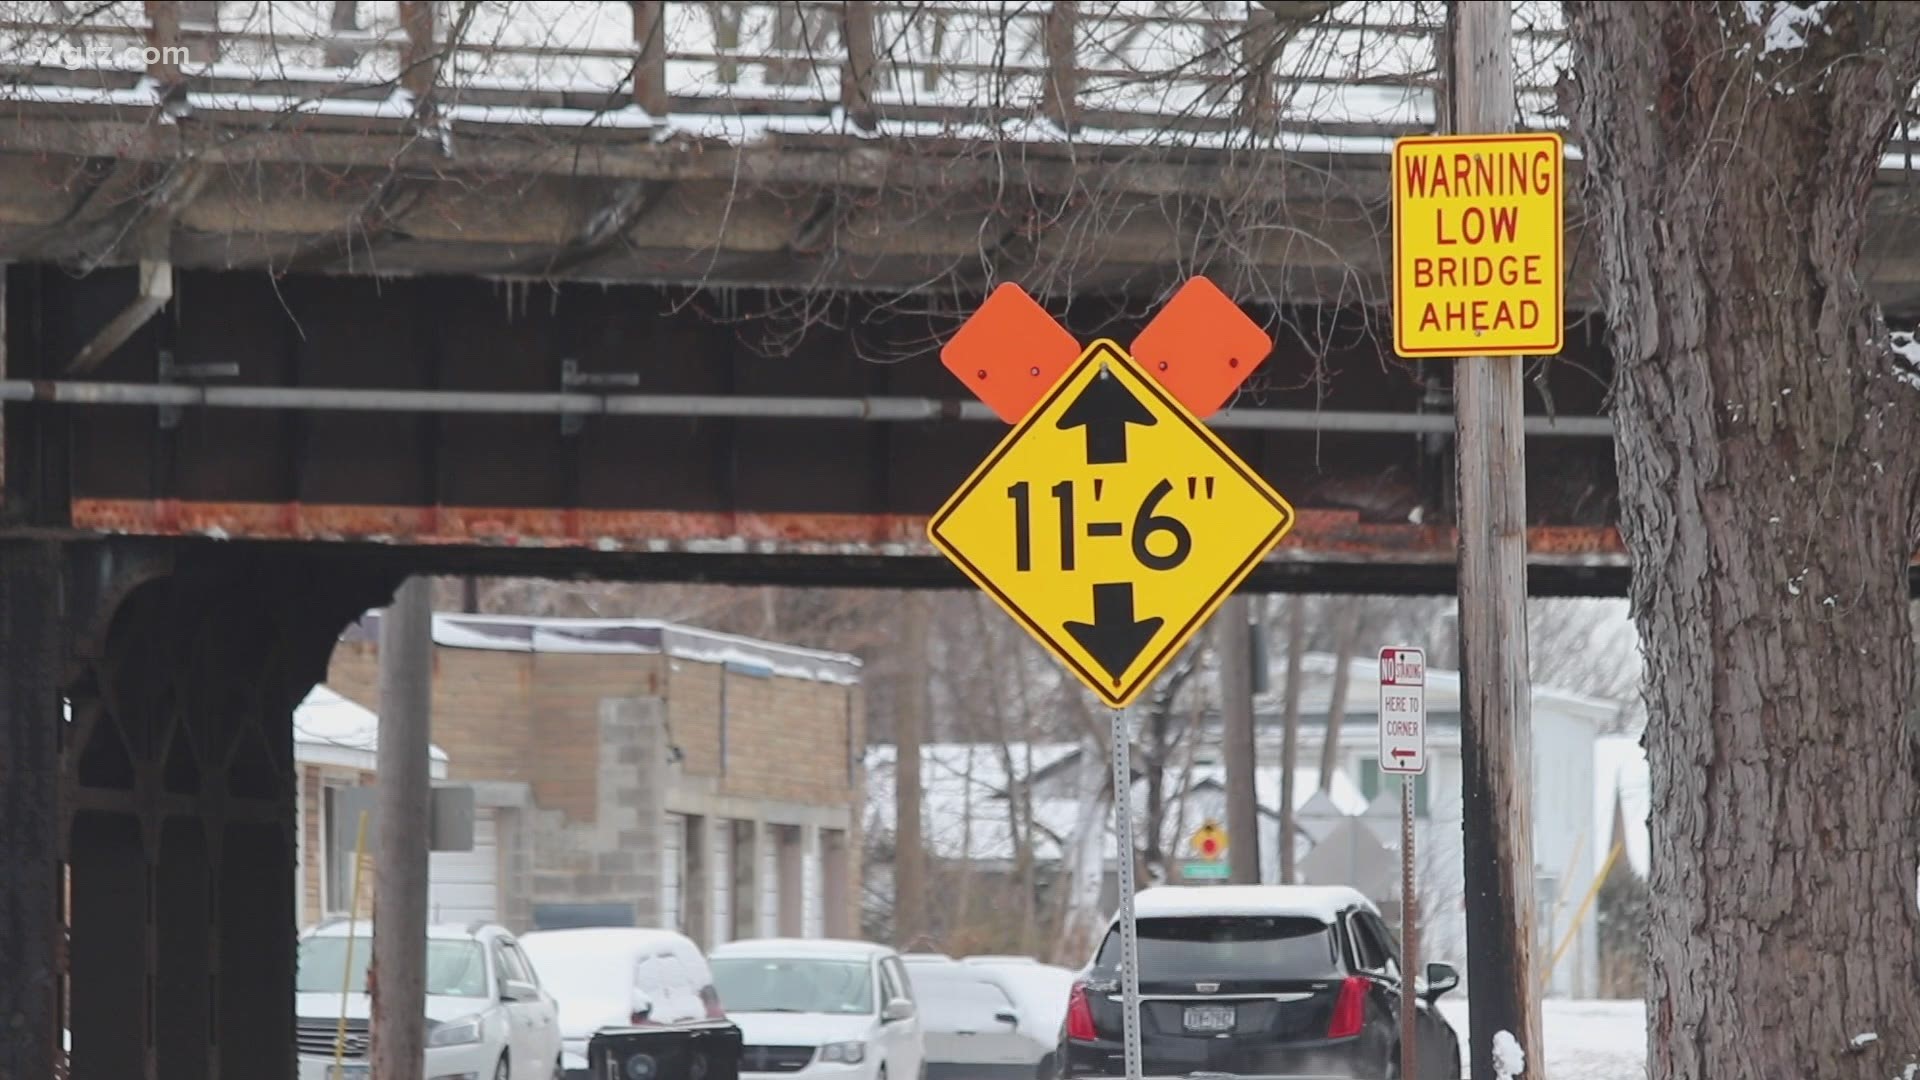 City has already tripled the recommended signage that the DOT says you should have for a low bridge.